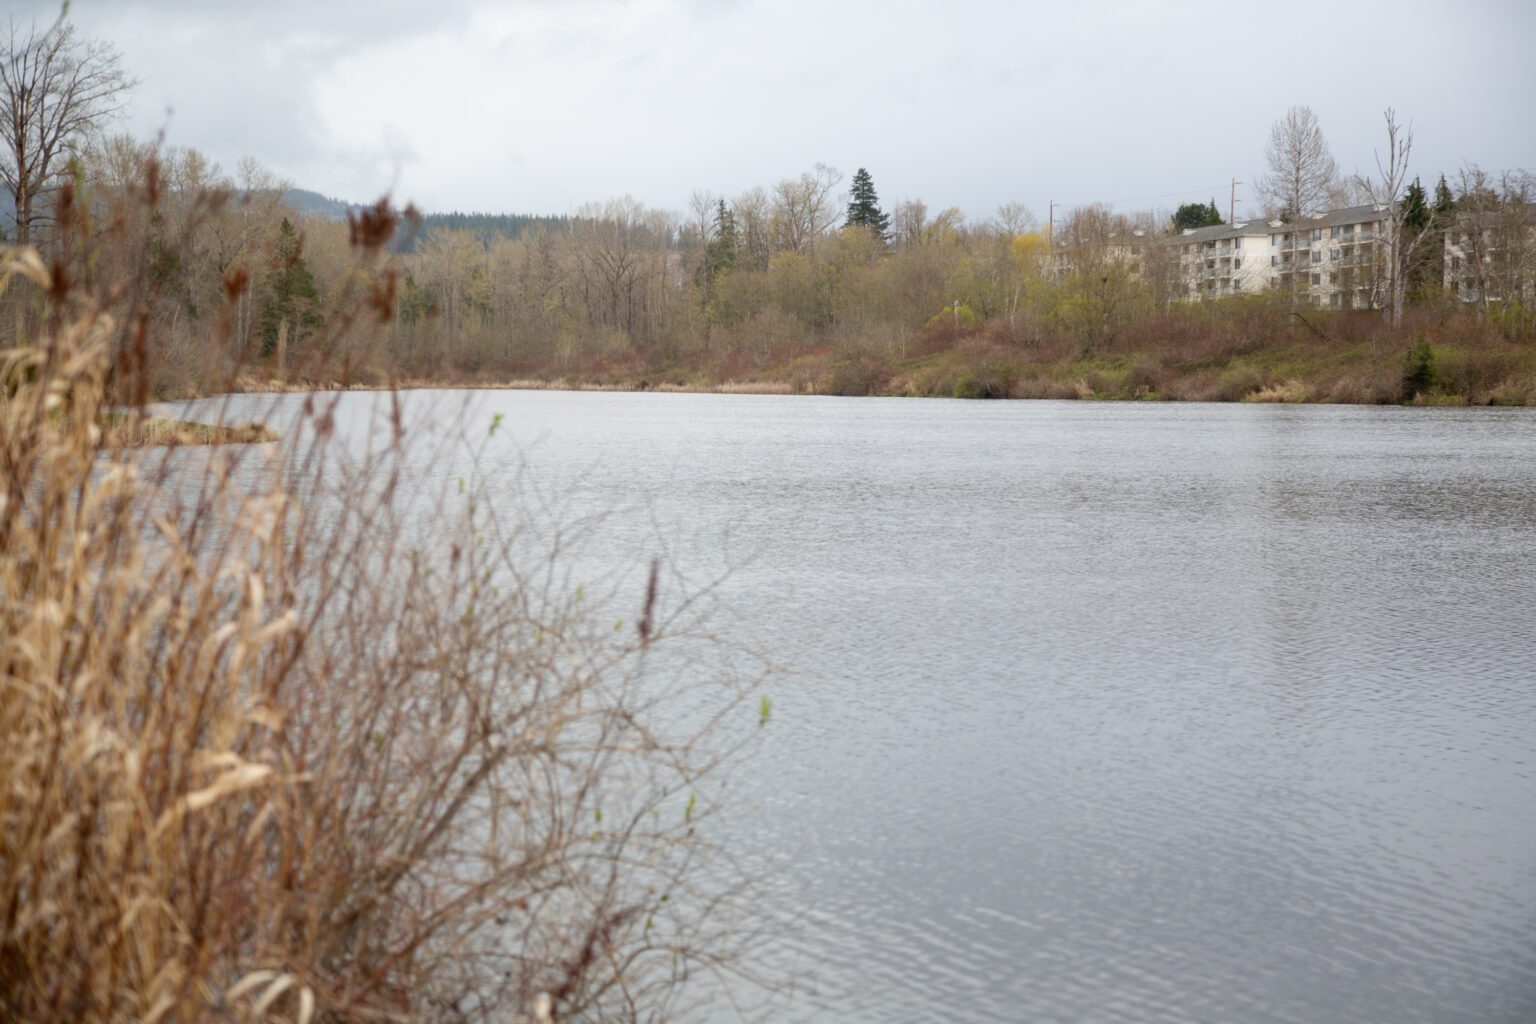 The City of Bellingham is planning to add a new trail circumnavigating Sunset Pond. The project will cost an estimated $2 million